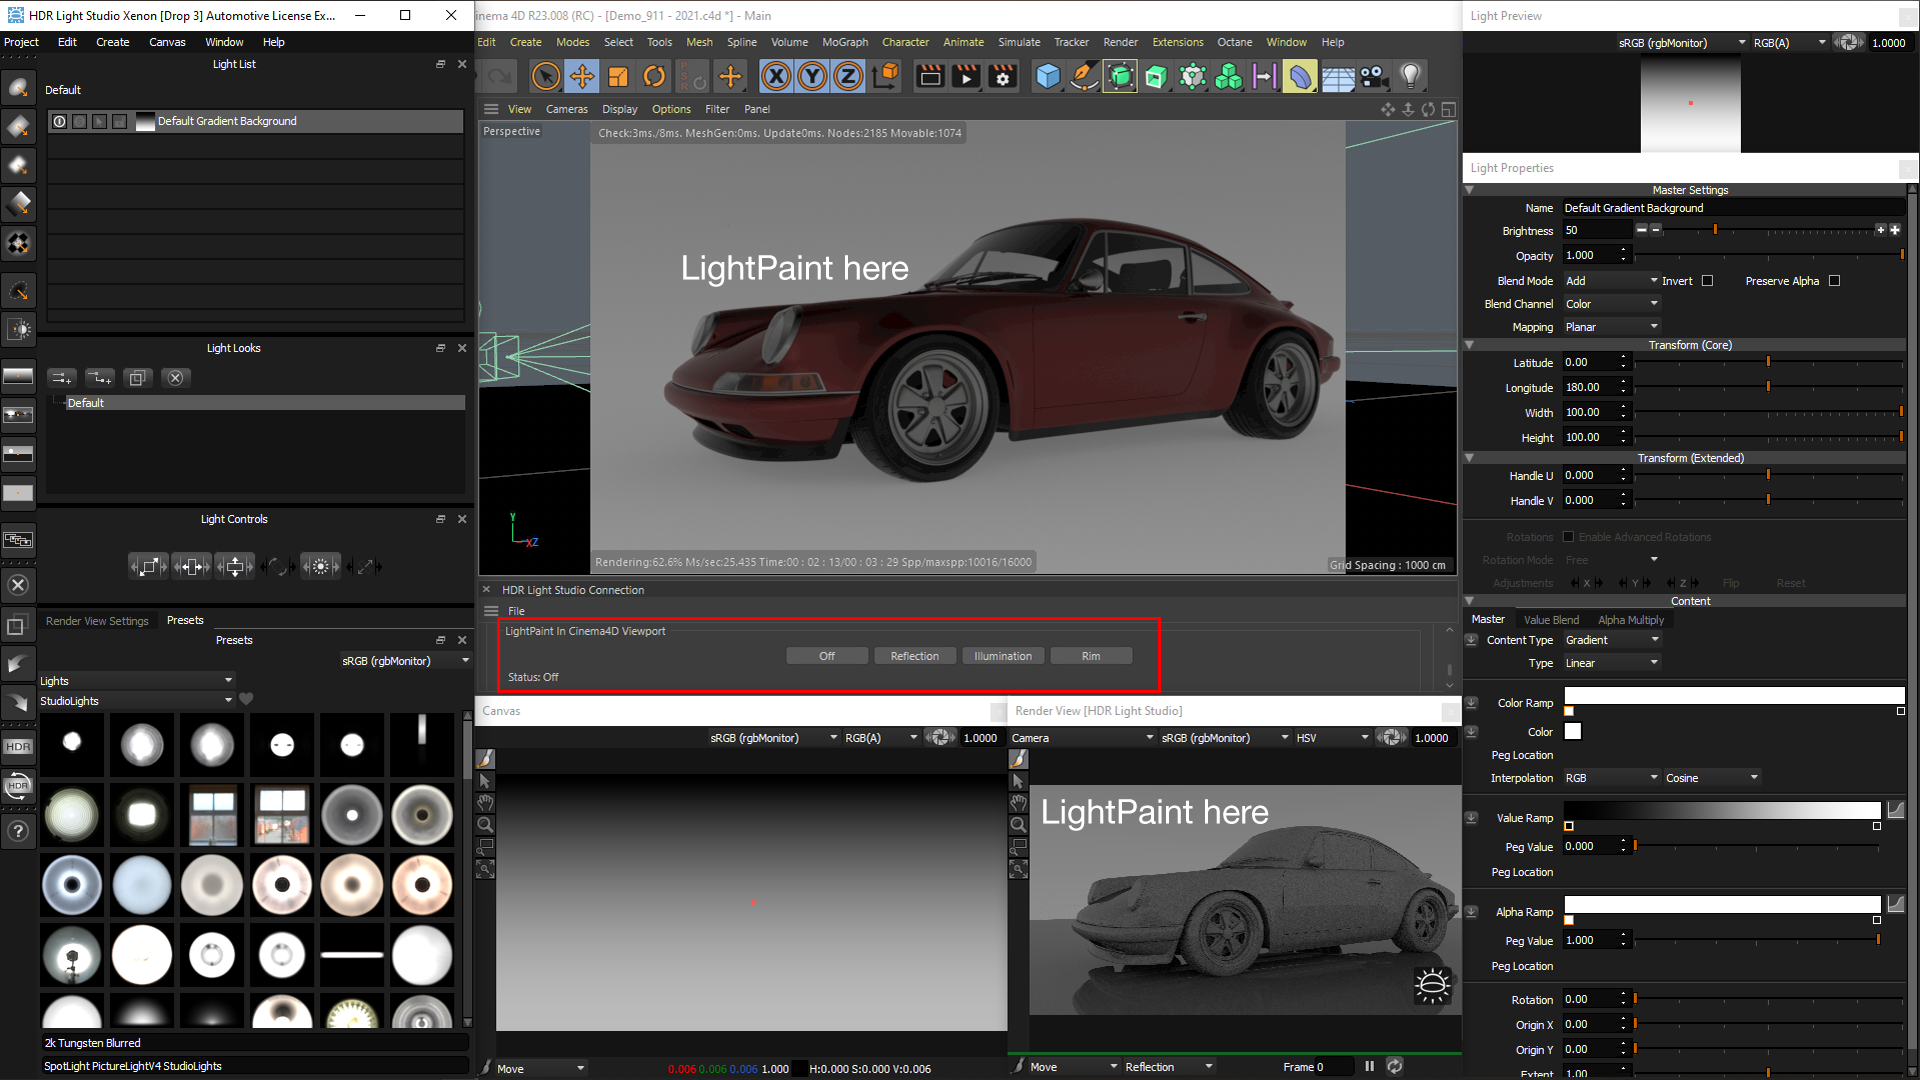 HDR Light Studio in front and arranged around the Cinema 4D viewport